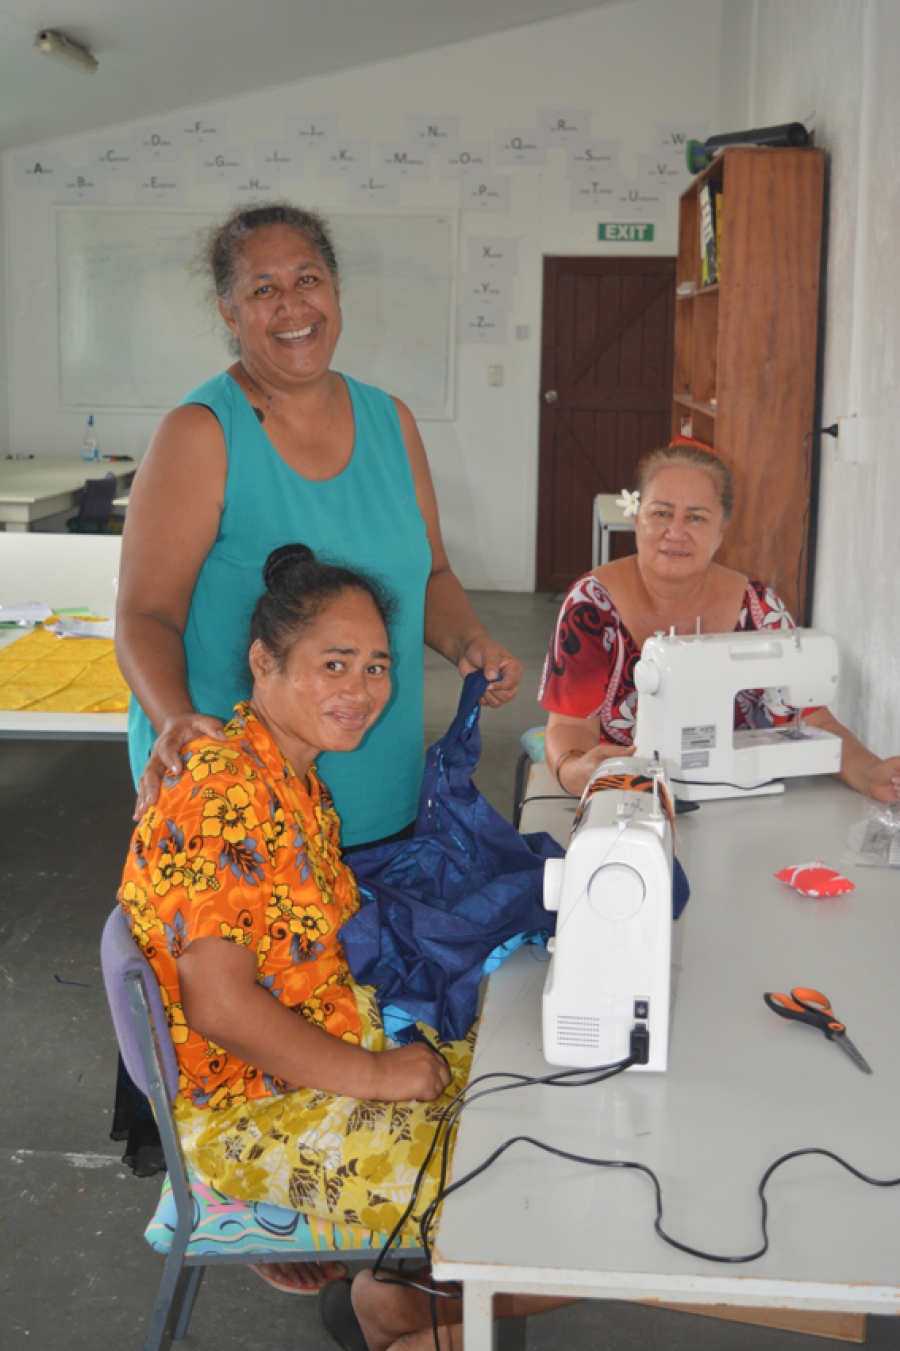 Simple approach makes sewing course popular